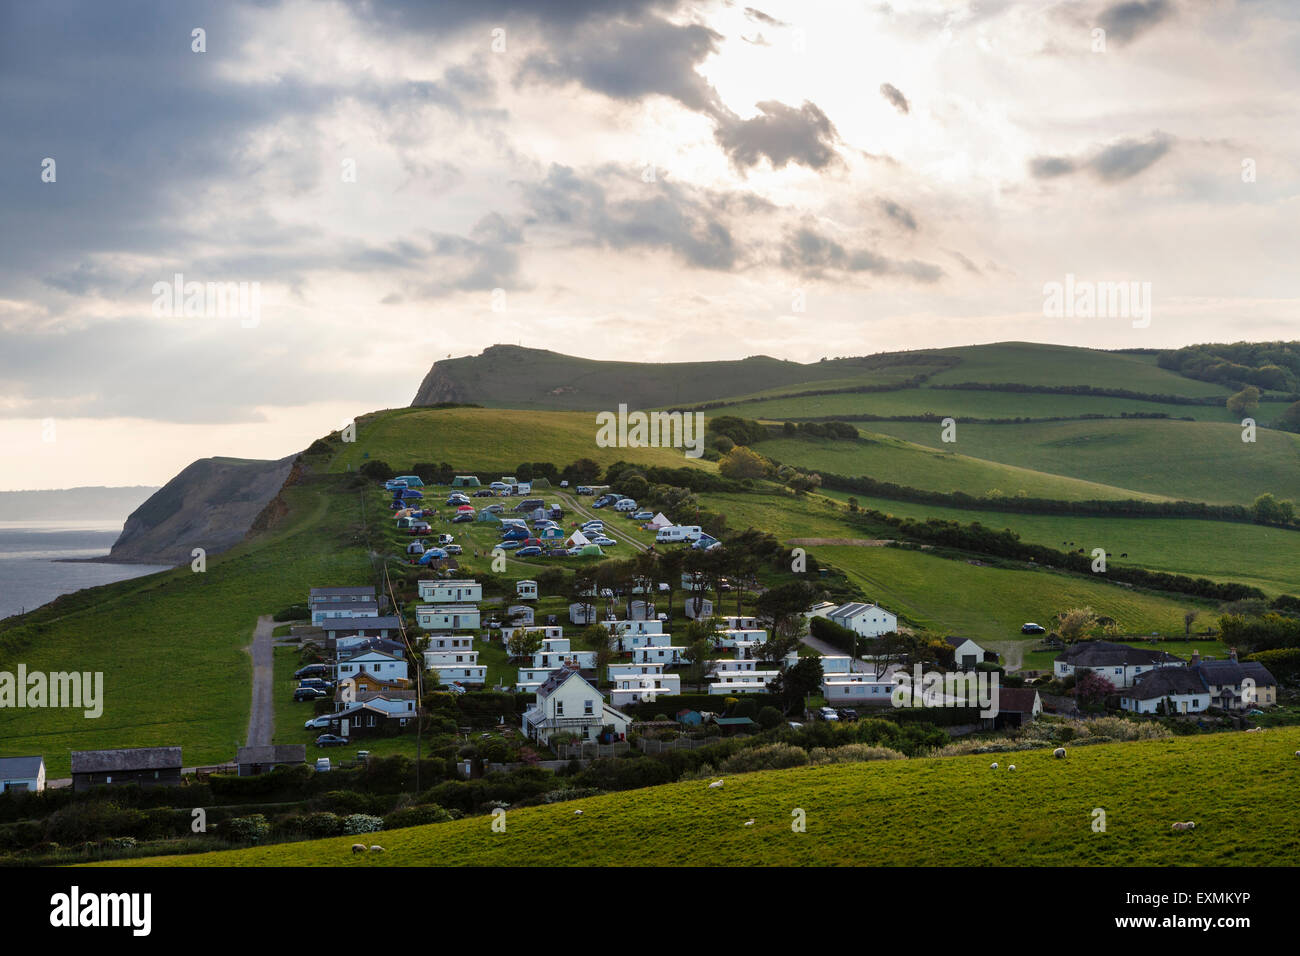 Caravan site in beautiful countryside at Eype on the Jurassic Coast, Dorset. Stock Photo